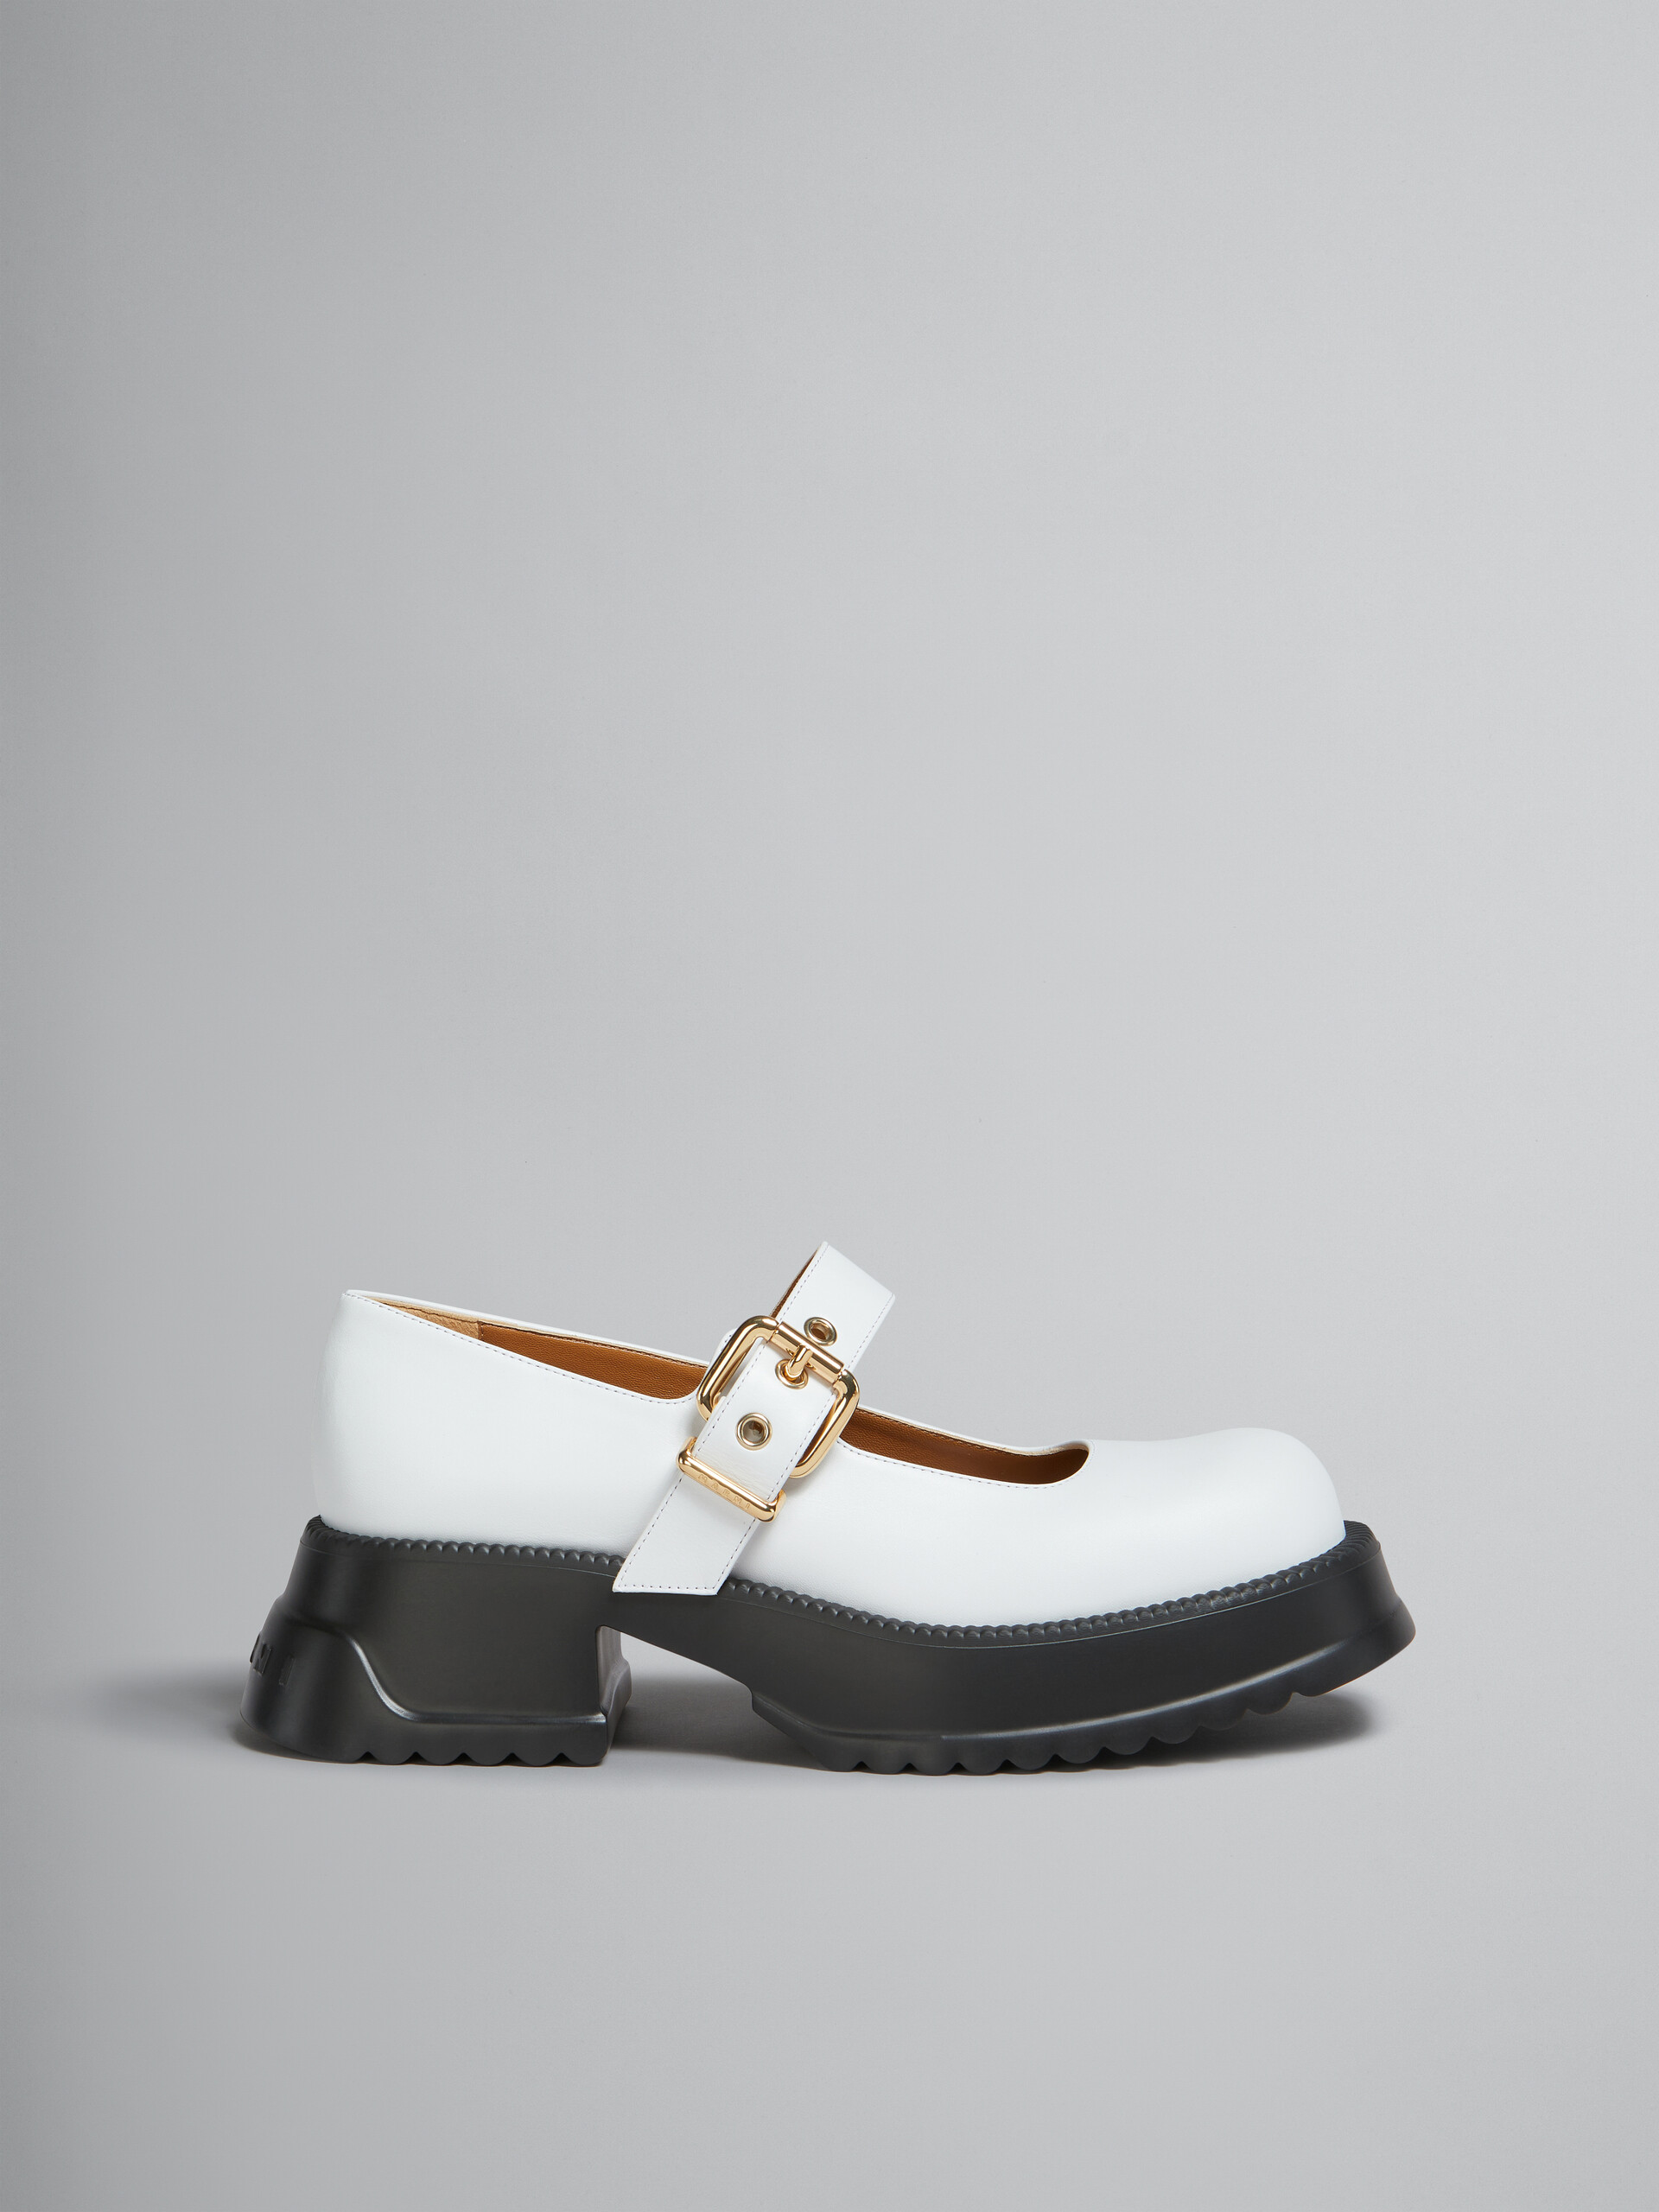 Mary Jane in pelle nera con suola platform - Sneakers - Image 1